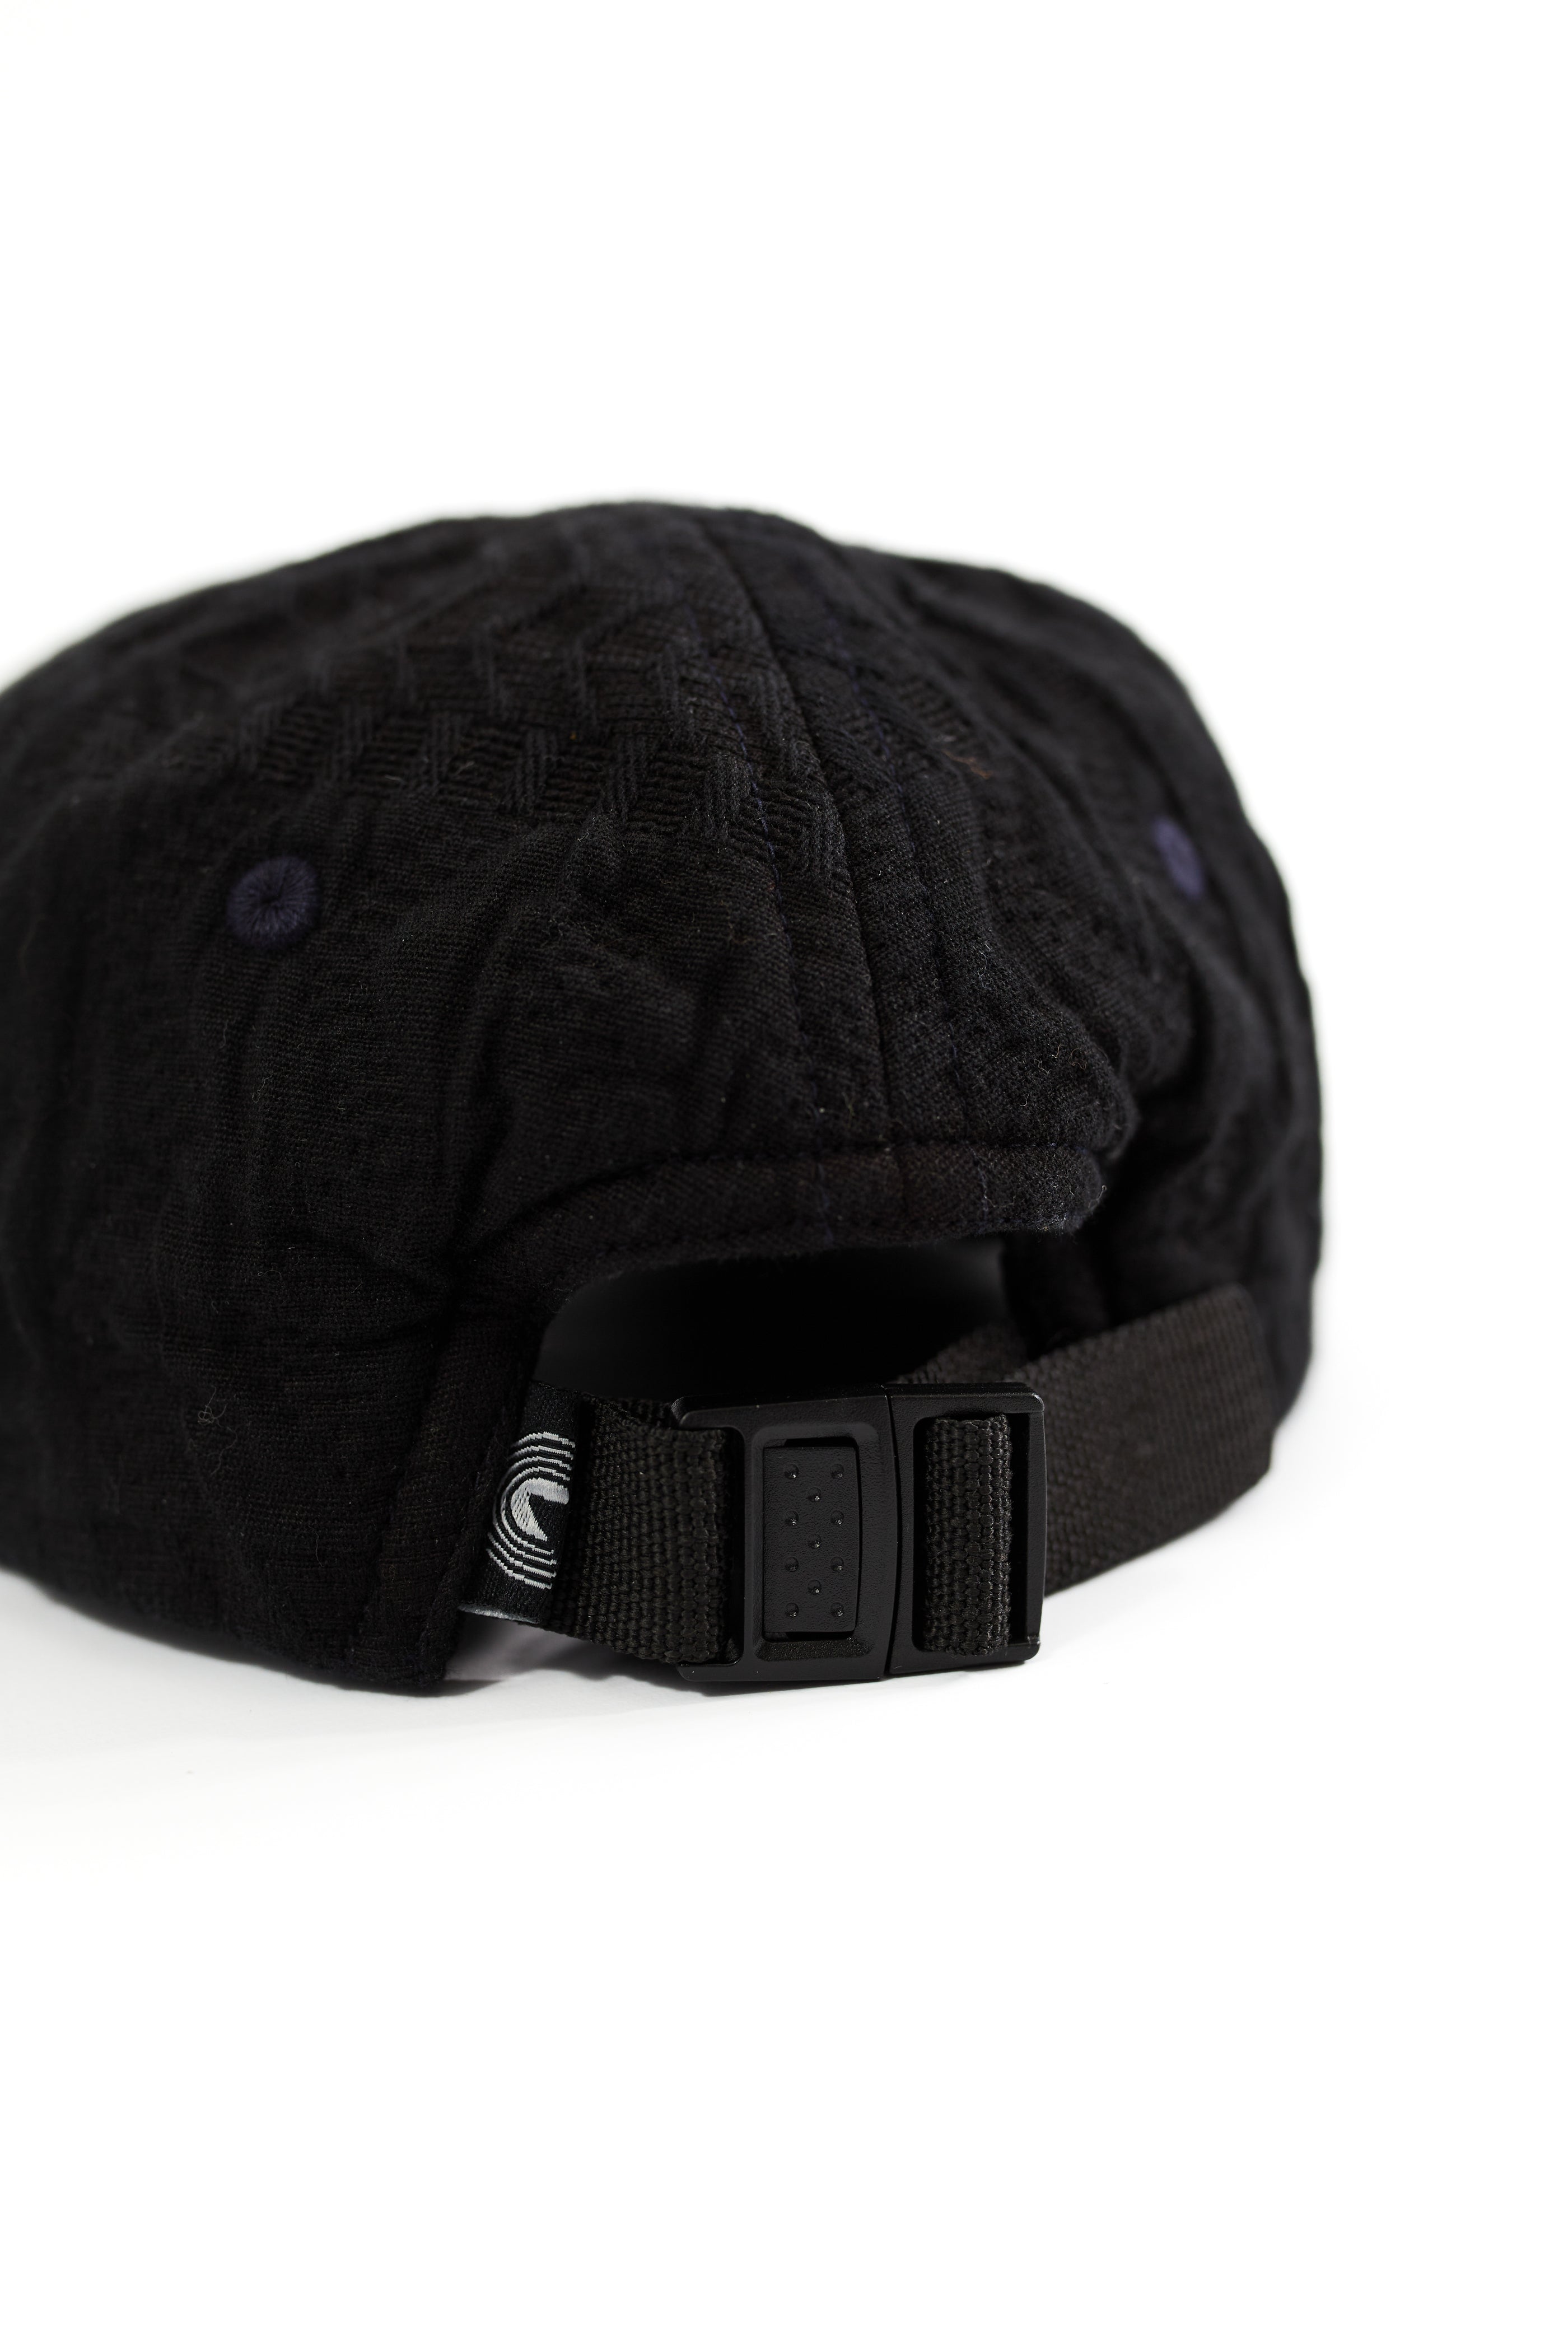 STOWE 5 PANEL HAT - BLACK OVERDYED DOUBLE WEAVE